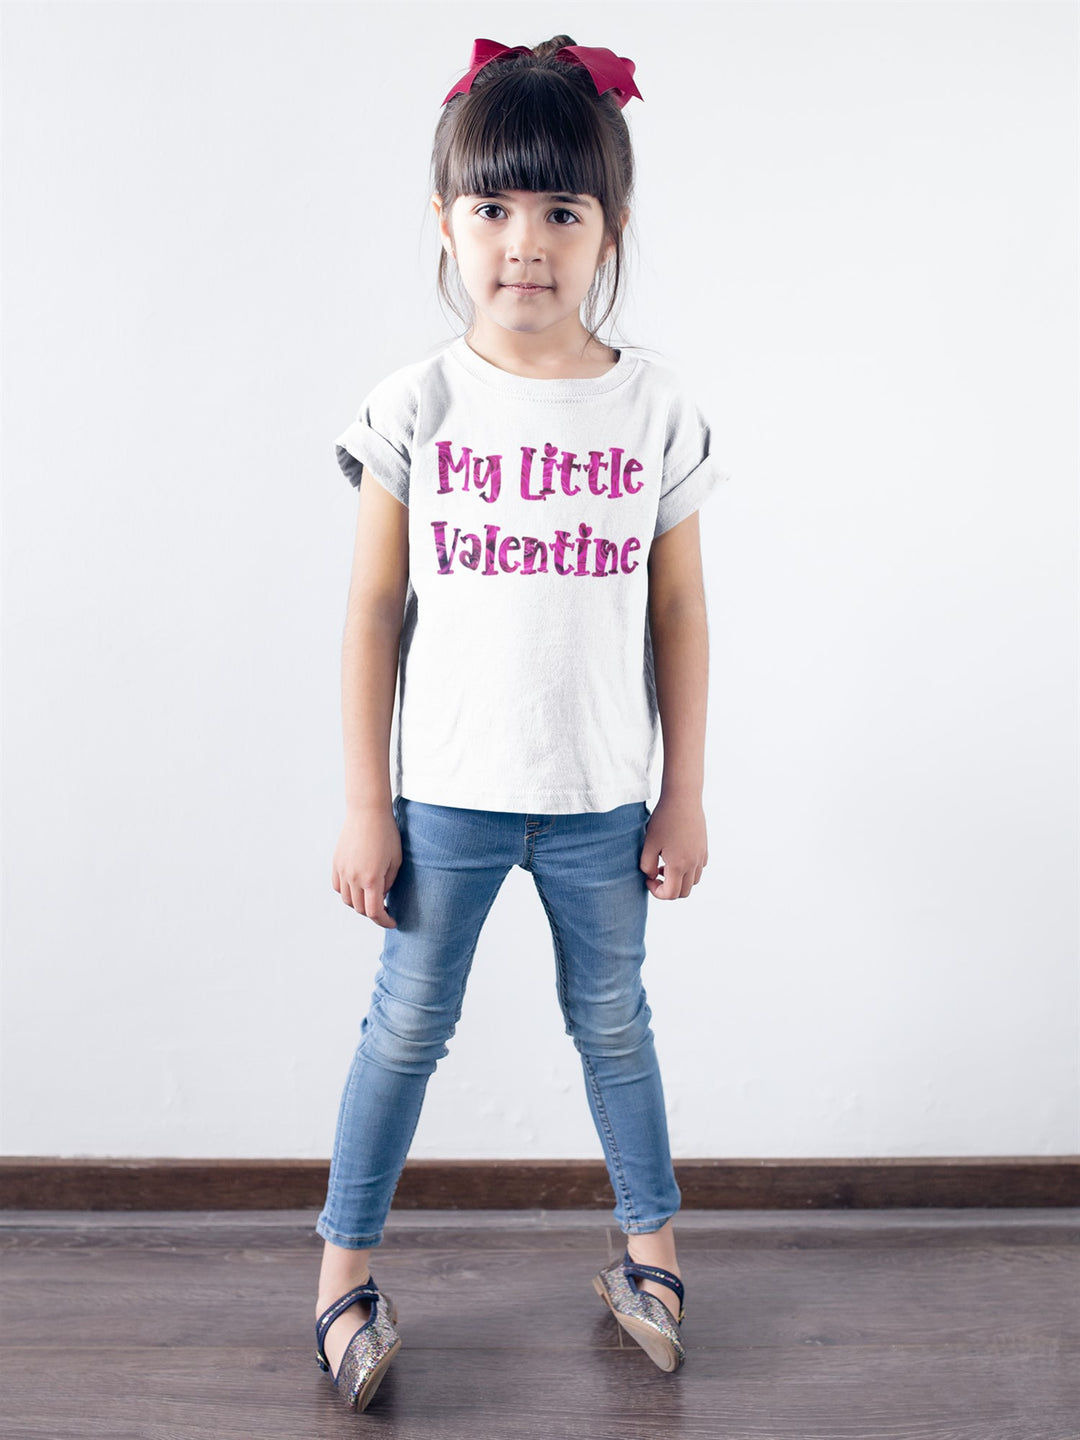 My Little Valentine Pink Roses. Short Sleeve T Shirt For Toddler And Kids. - TeesForToddlersandKids -  t-shirt - holidays, Love - my-little-valentine-pink-roses-short-sleeve-t-shirt-for-toddler-and-kids